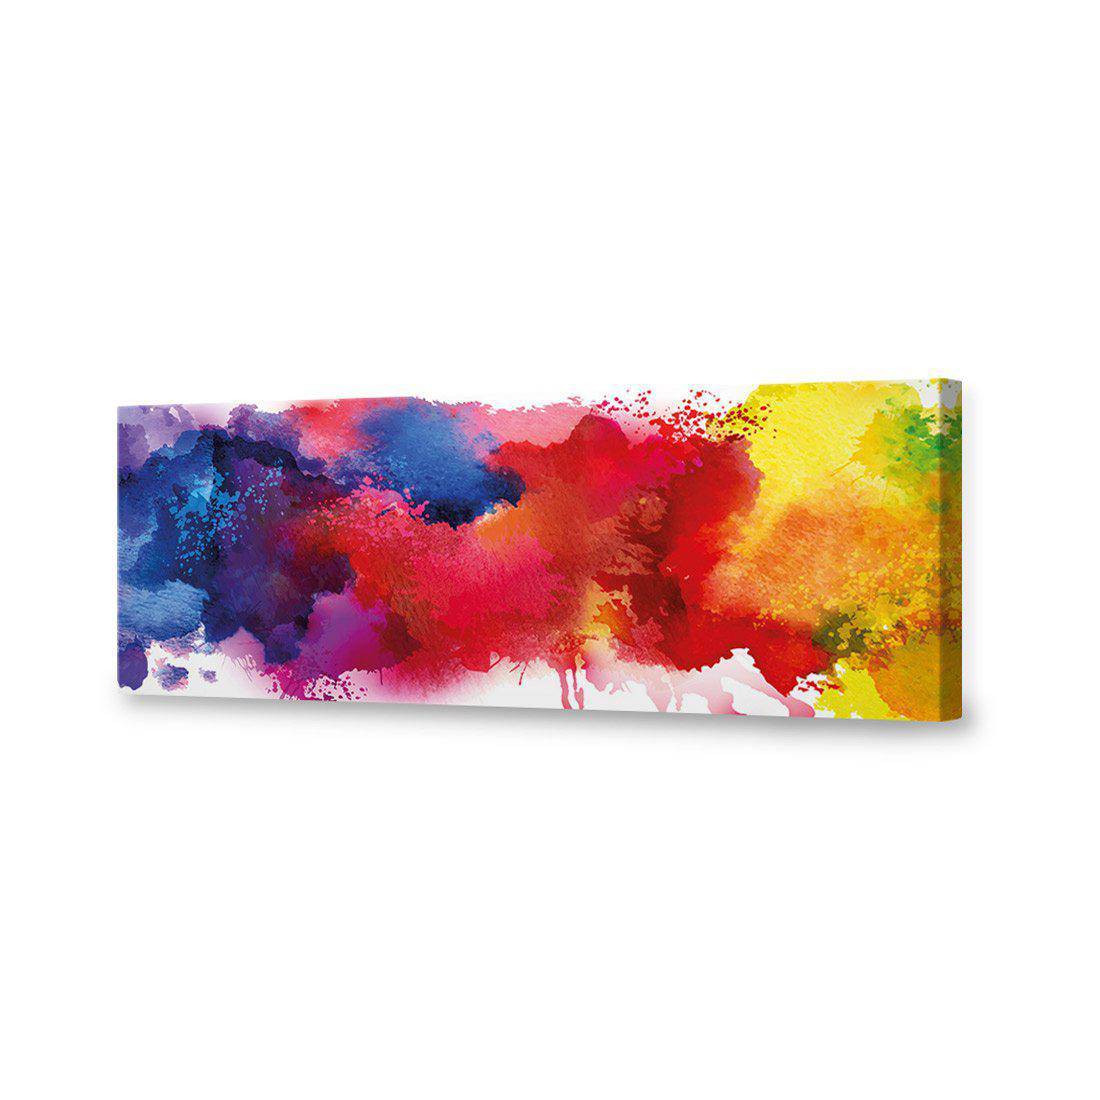 Primary Stains Canvas Art-Canvas-Wall Art Designs-60x20cm-Canvas - No Frame-Wall Art Designs